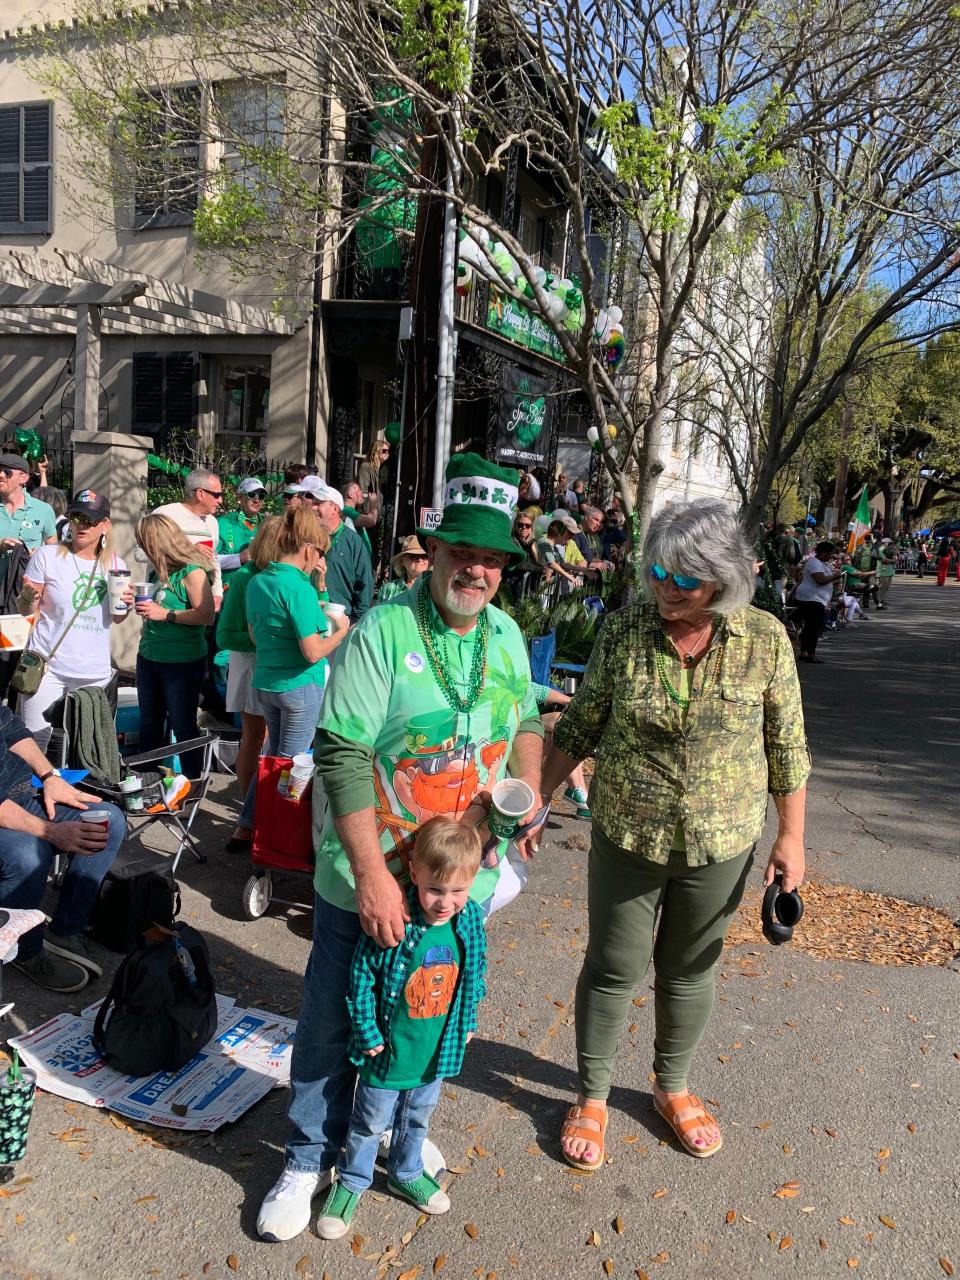 Dennis Germann, from St. Marys, Georgia, has been coming with his family to Savannah's St. Patrick's Day parade for 15 years.